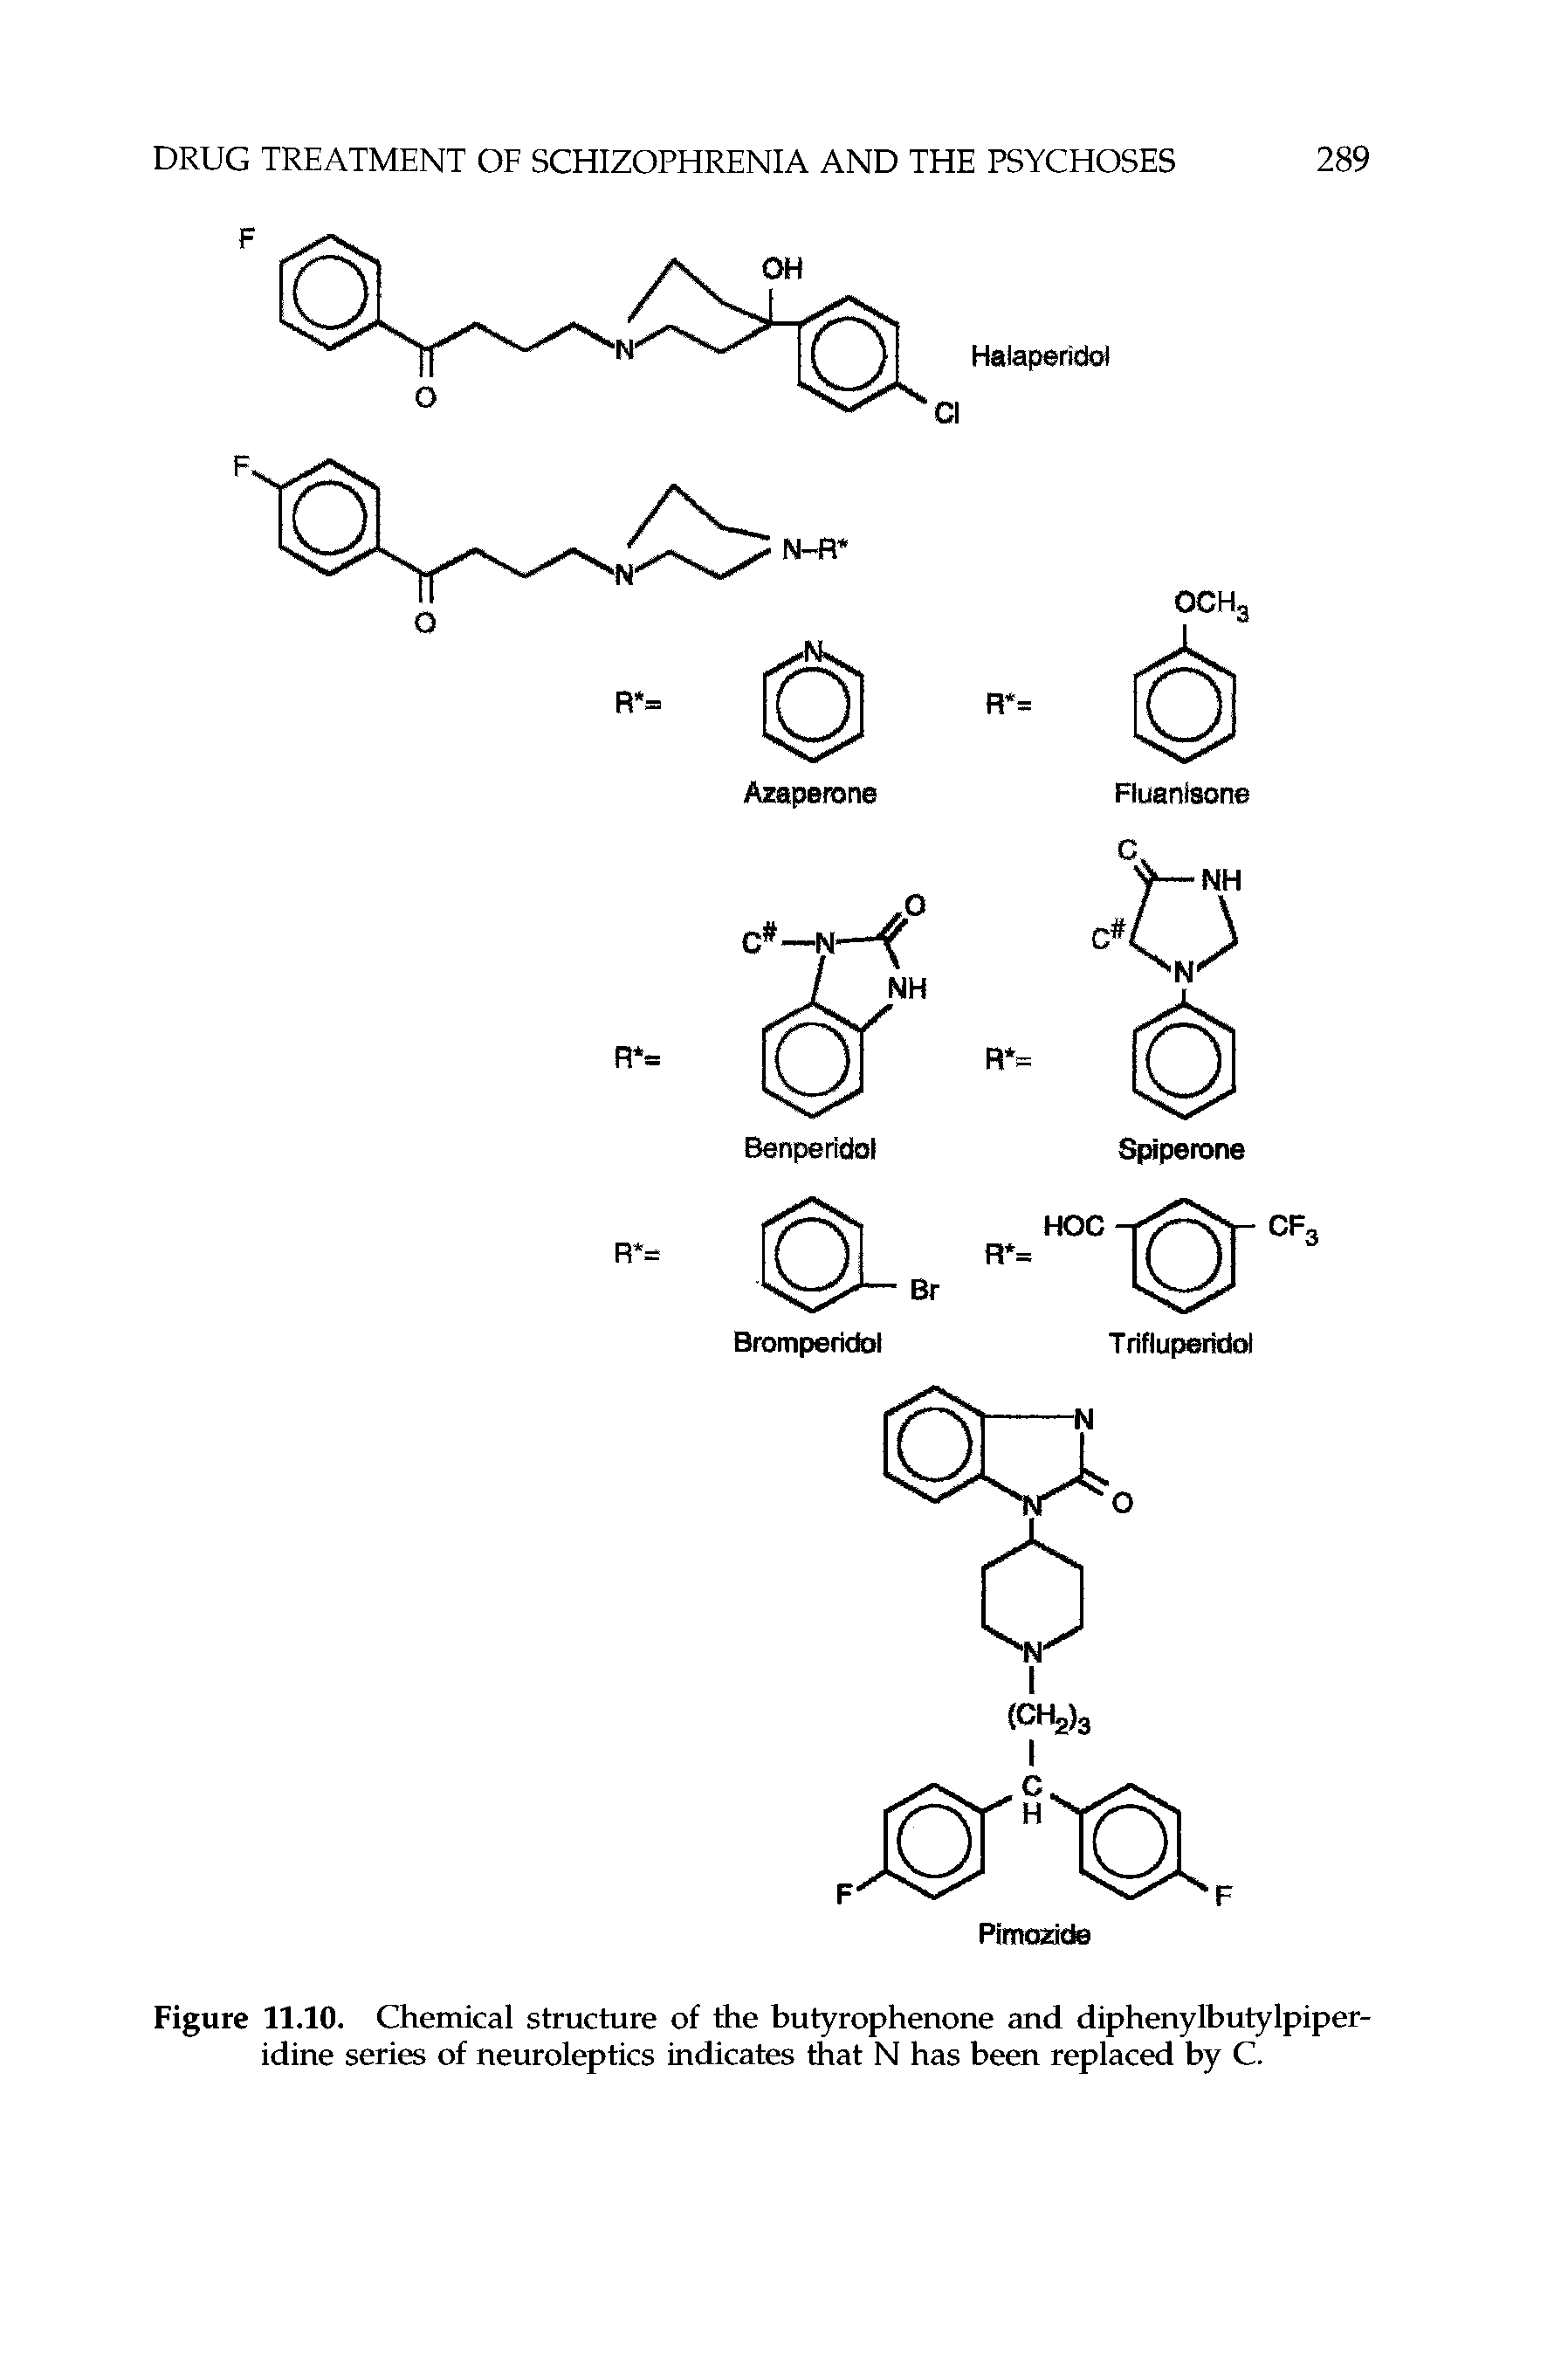 Figure 11.10. Chemical structure of the butyrophenone and diphenylbutylpiper-idine series of neuroleptics indicates that N has been replaced by C.